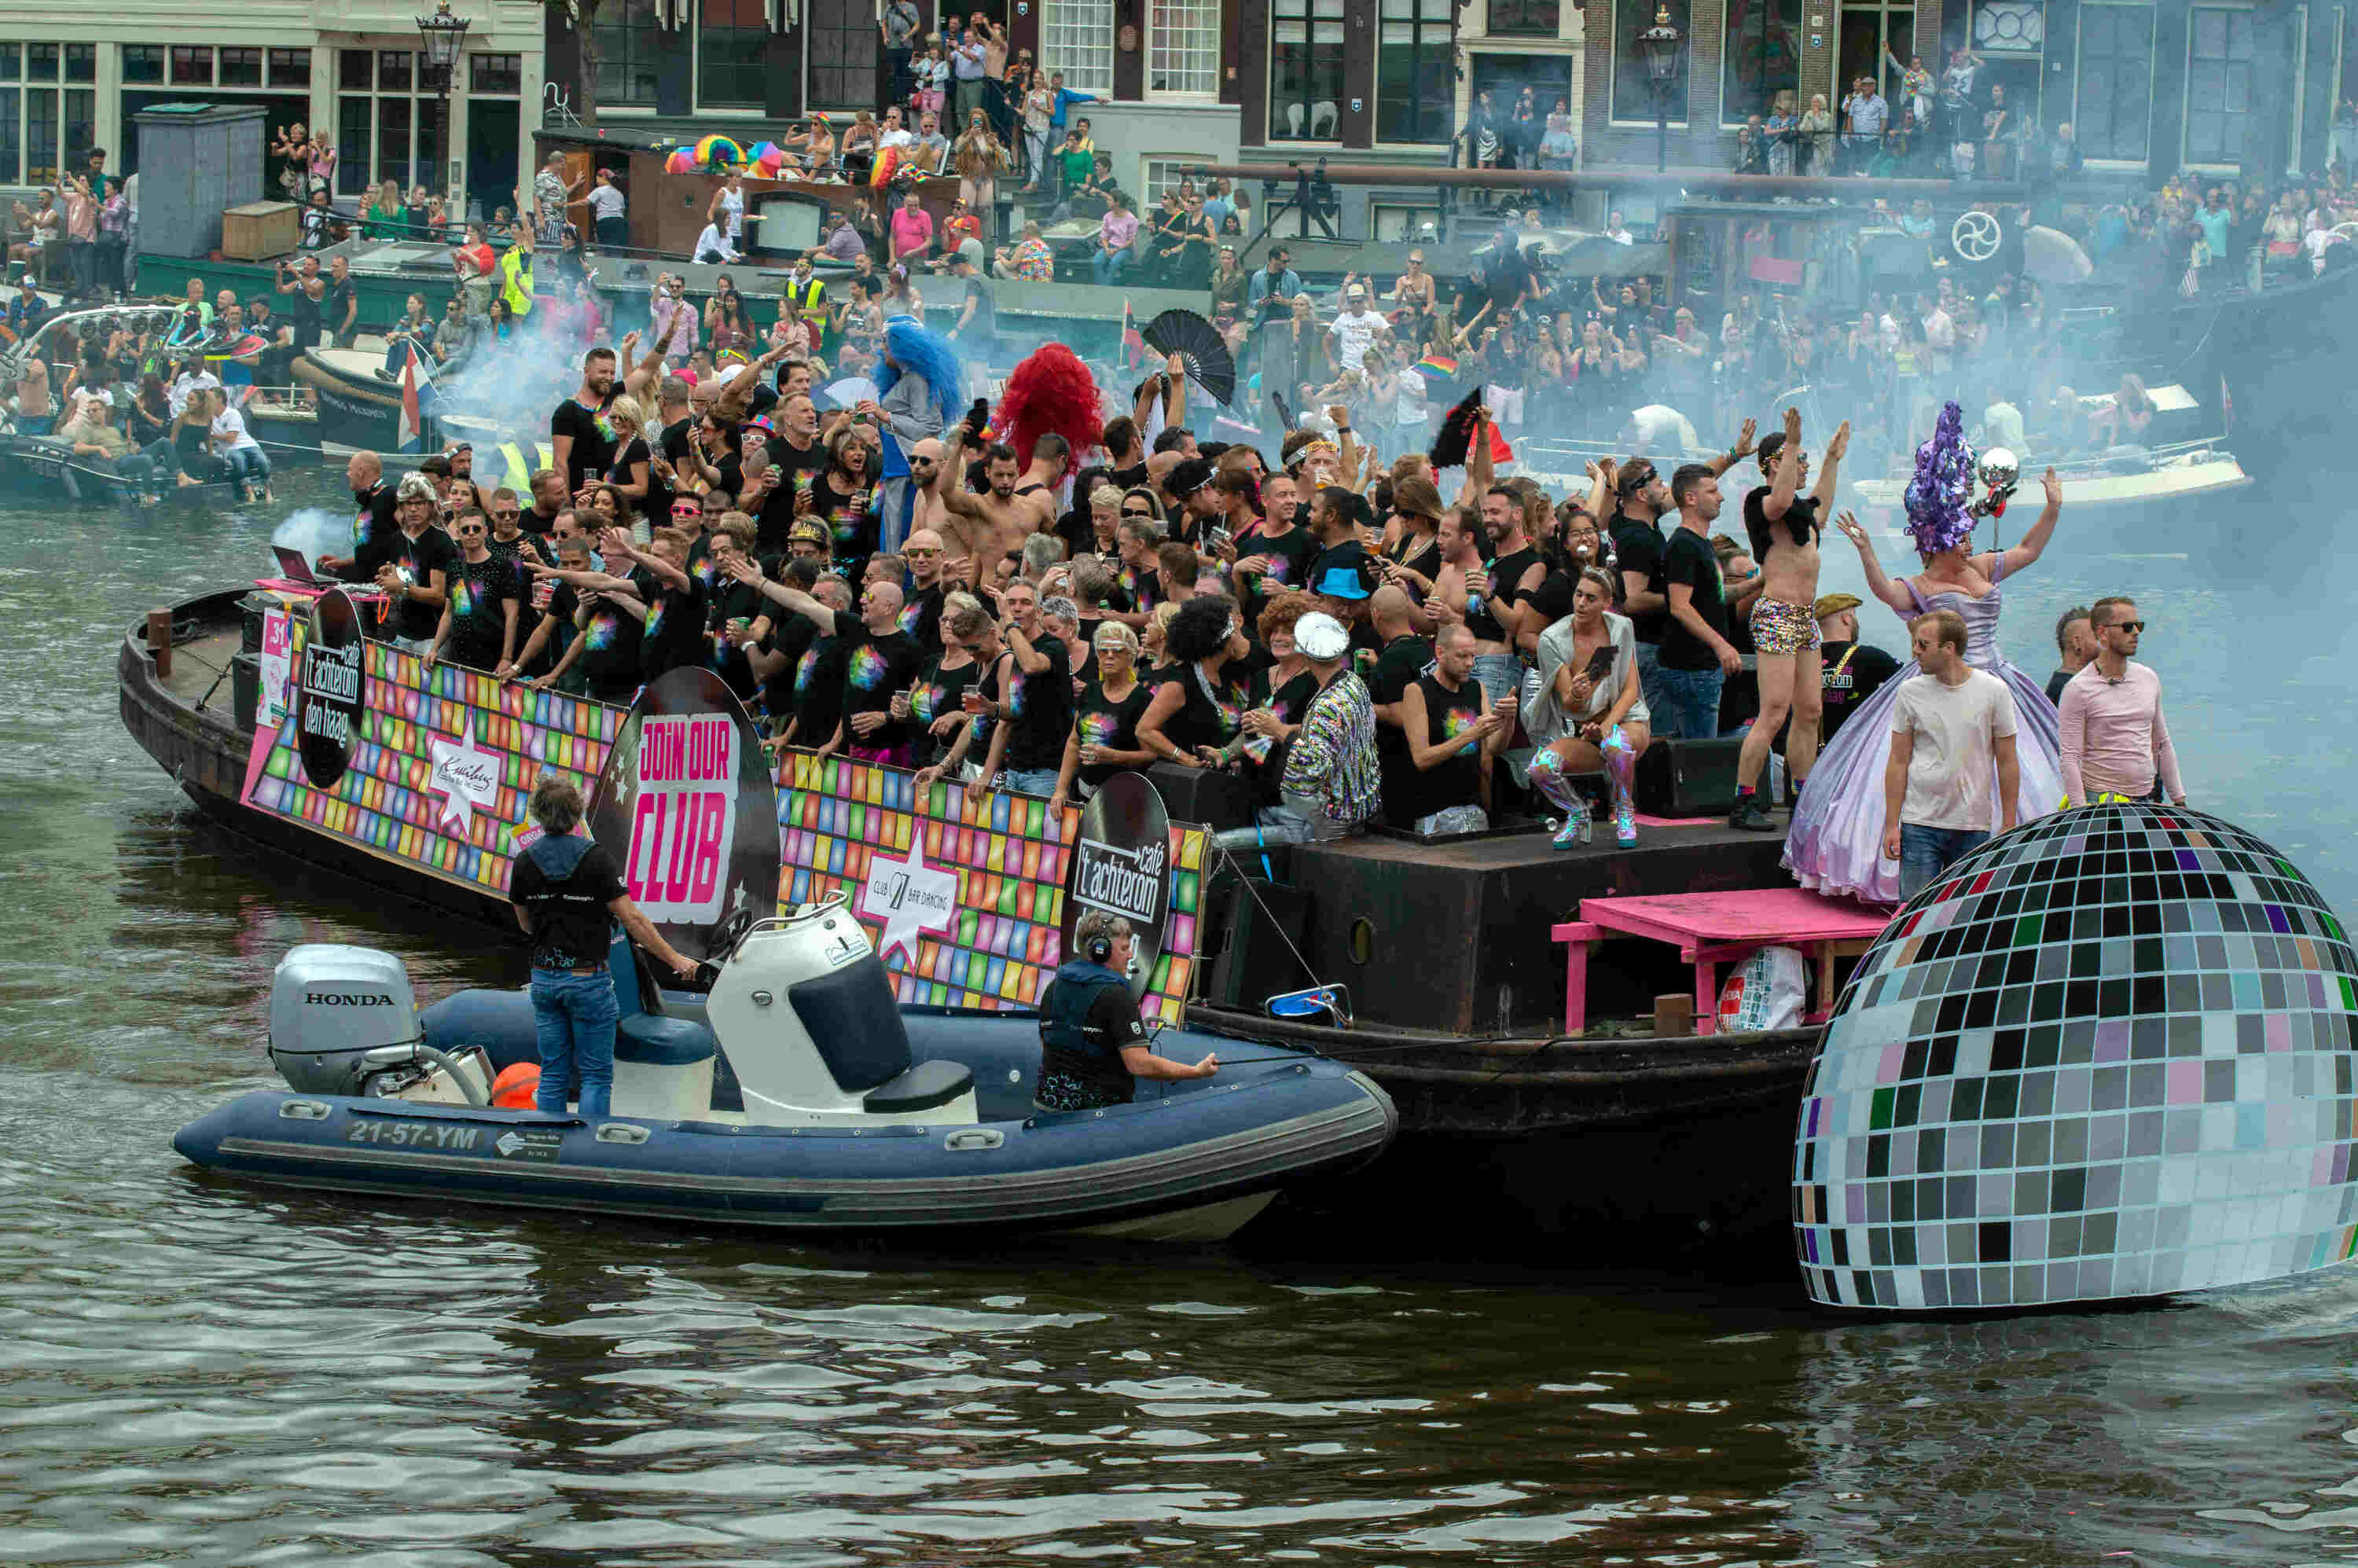 Queer & Lesbian Amsterdam: Things To Do, Bars, Clubs + Events